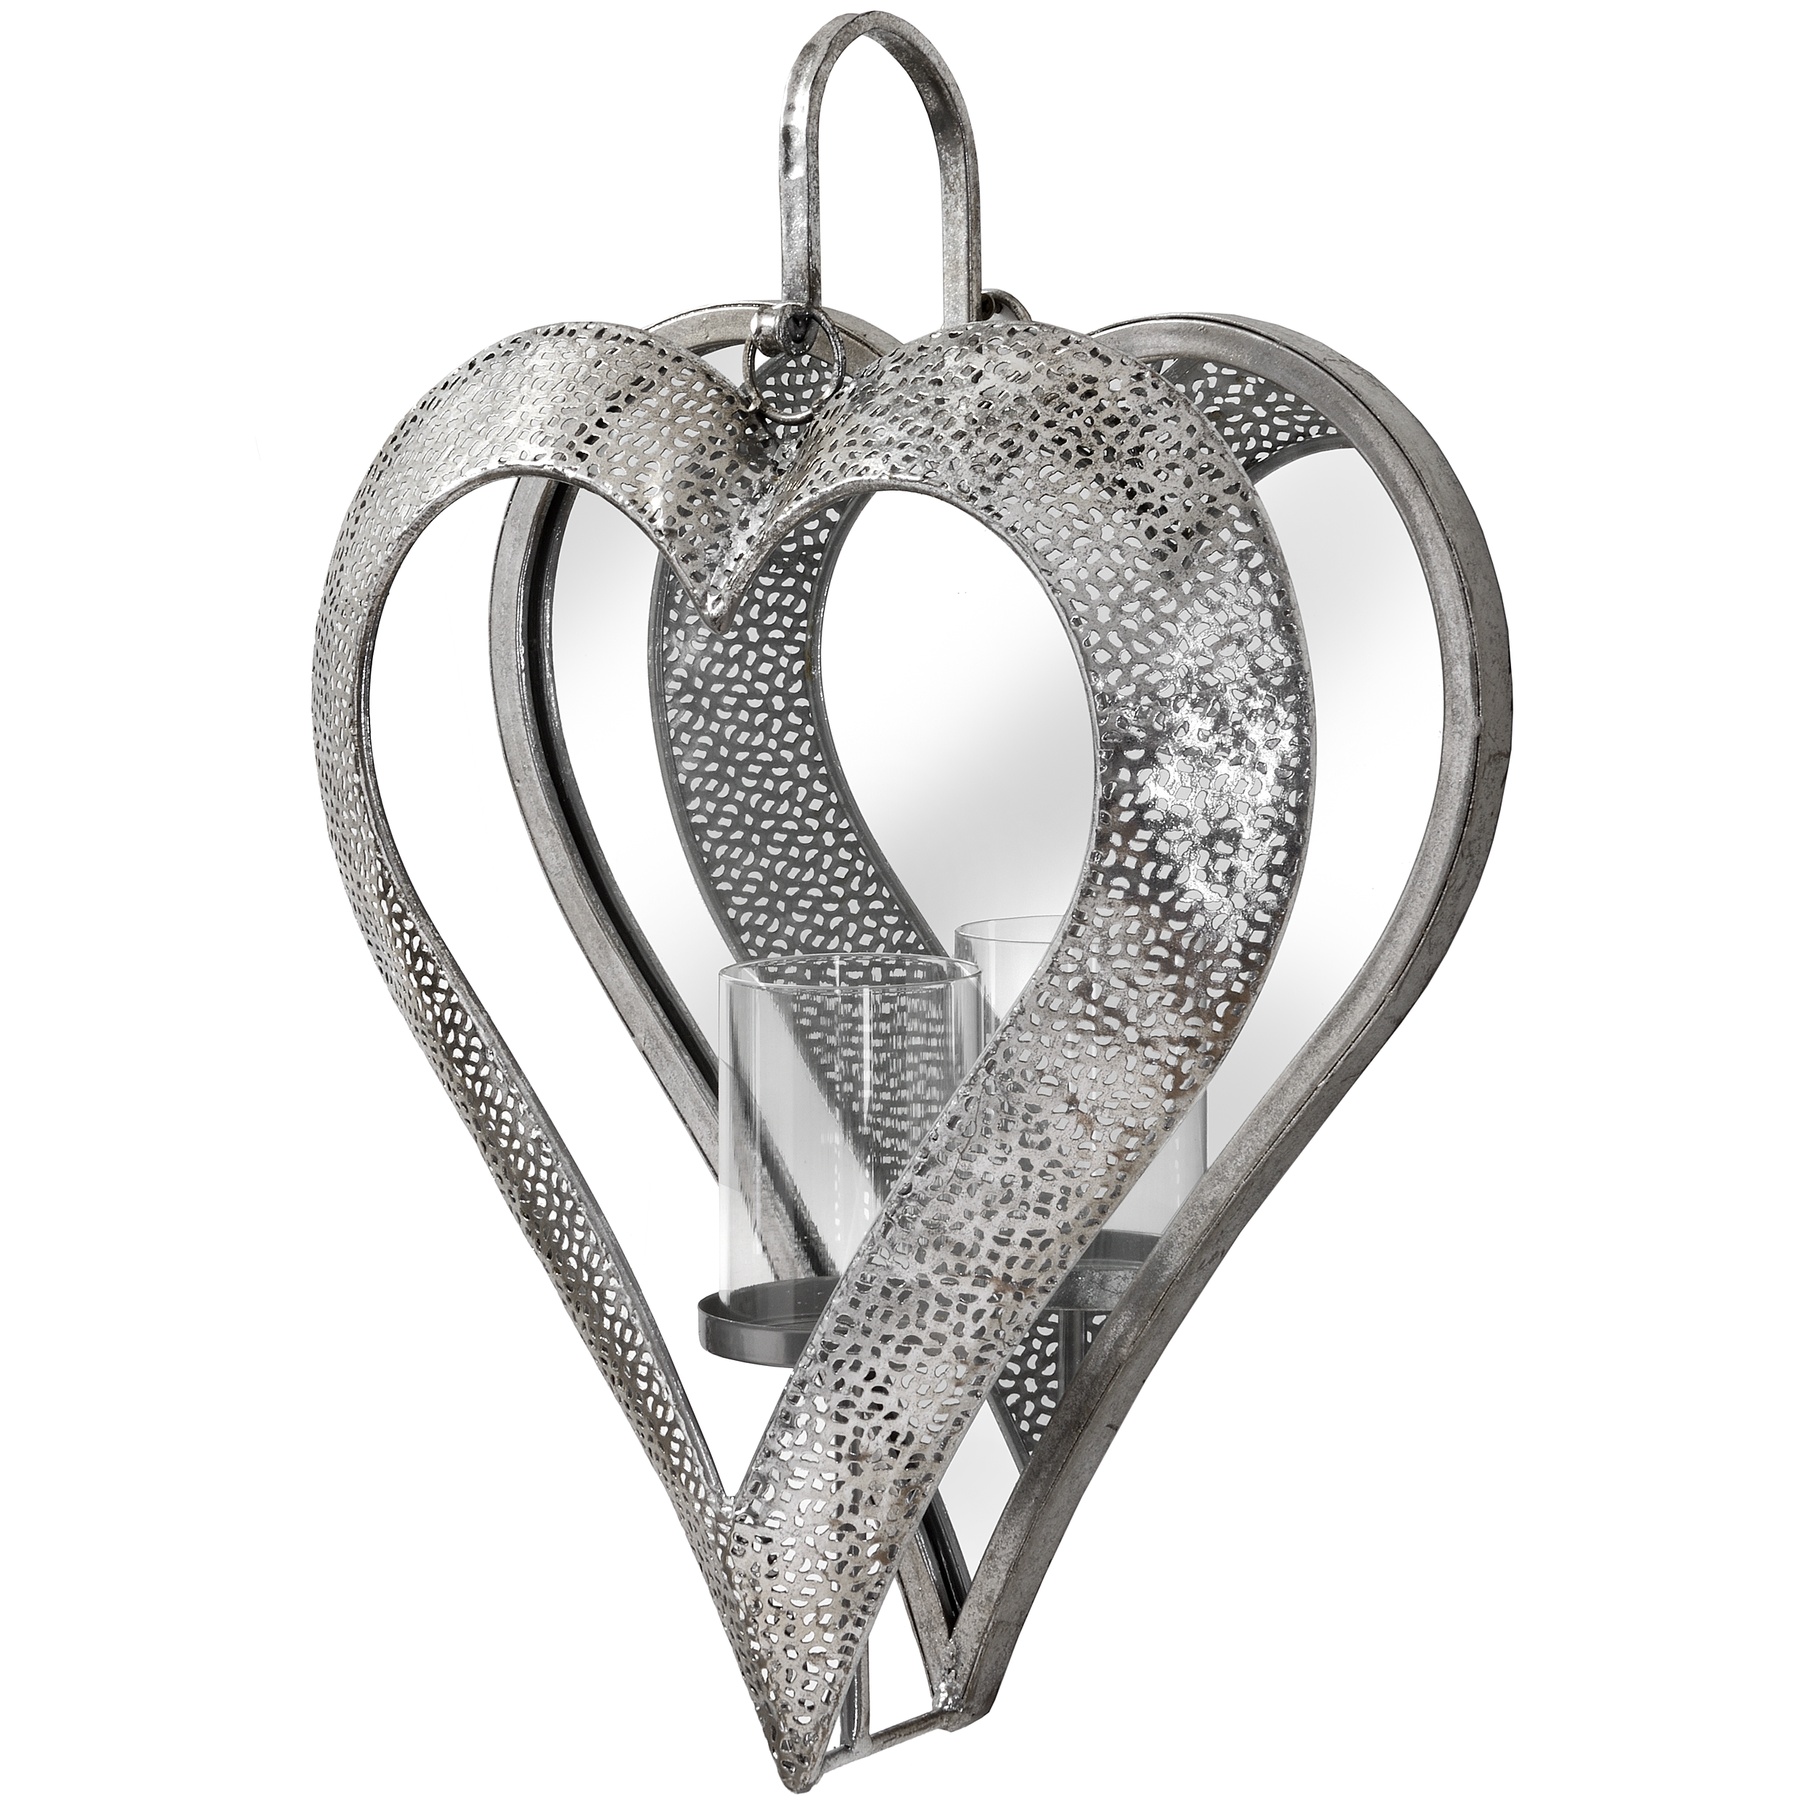 Antique Silver Heart Mirrored Tealight Holder in Large - Image 1